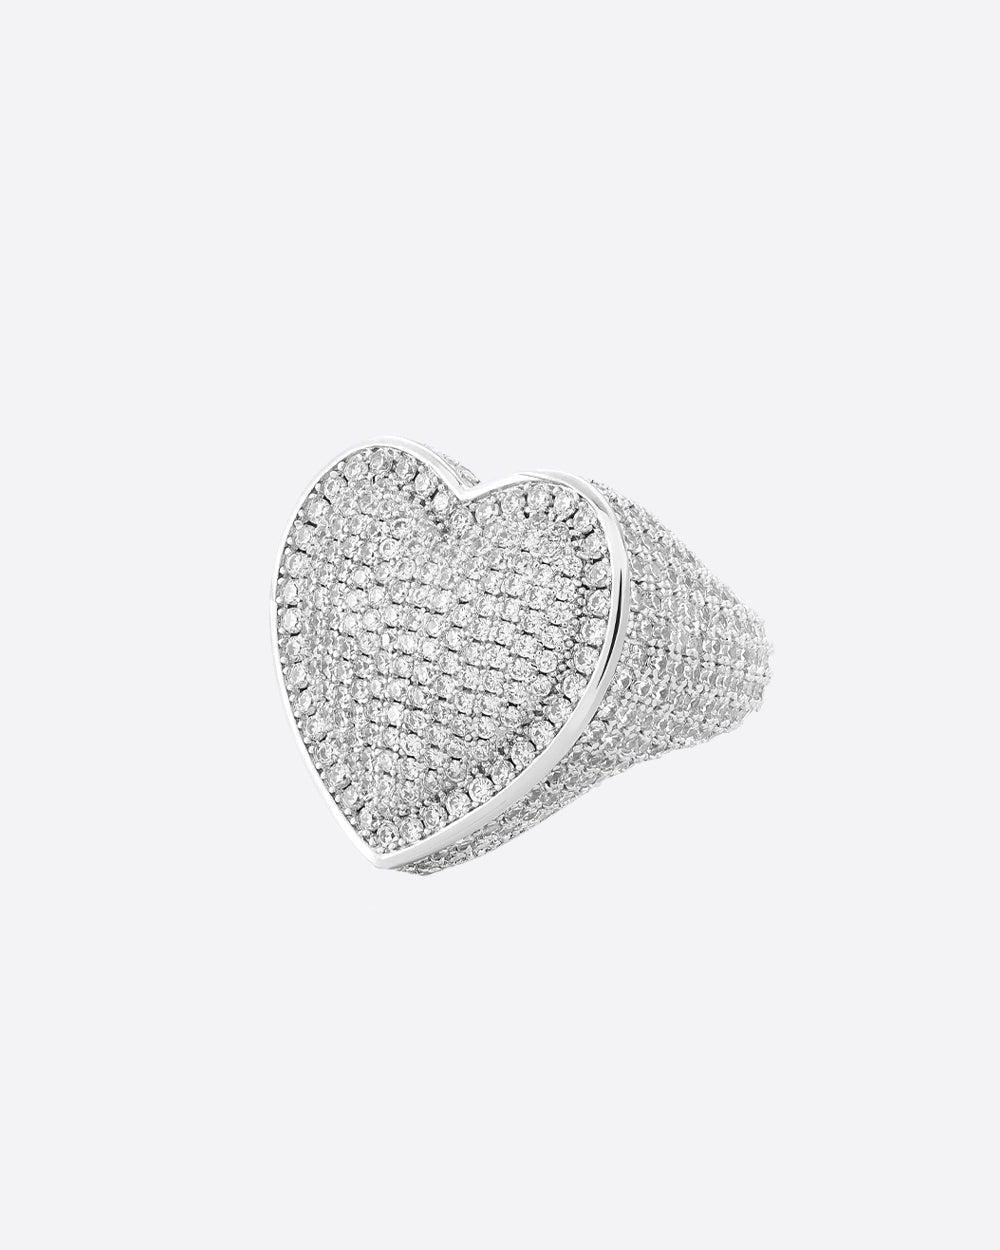 ICY PAVED HEART RING. - WHITE GOLD